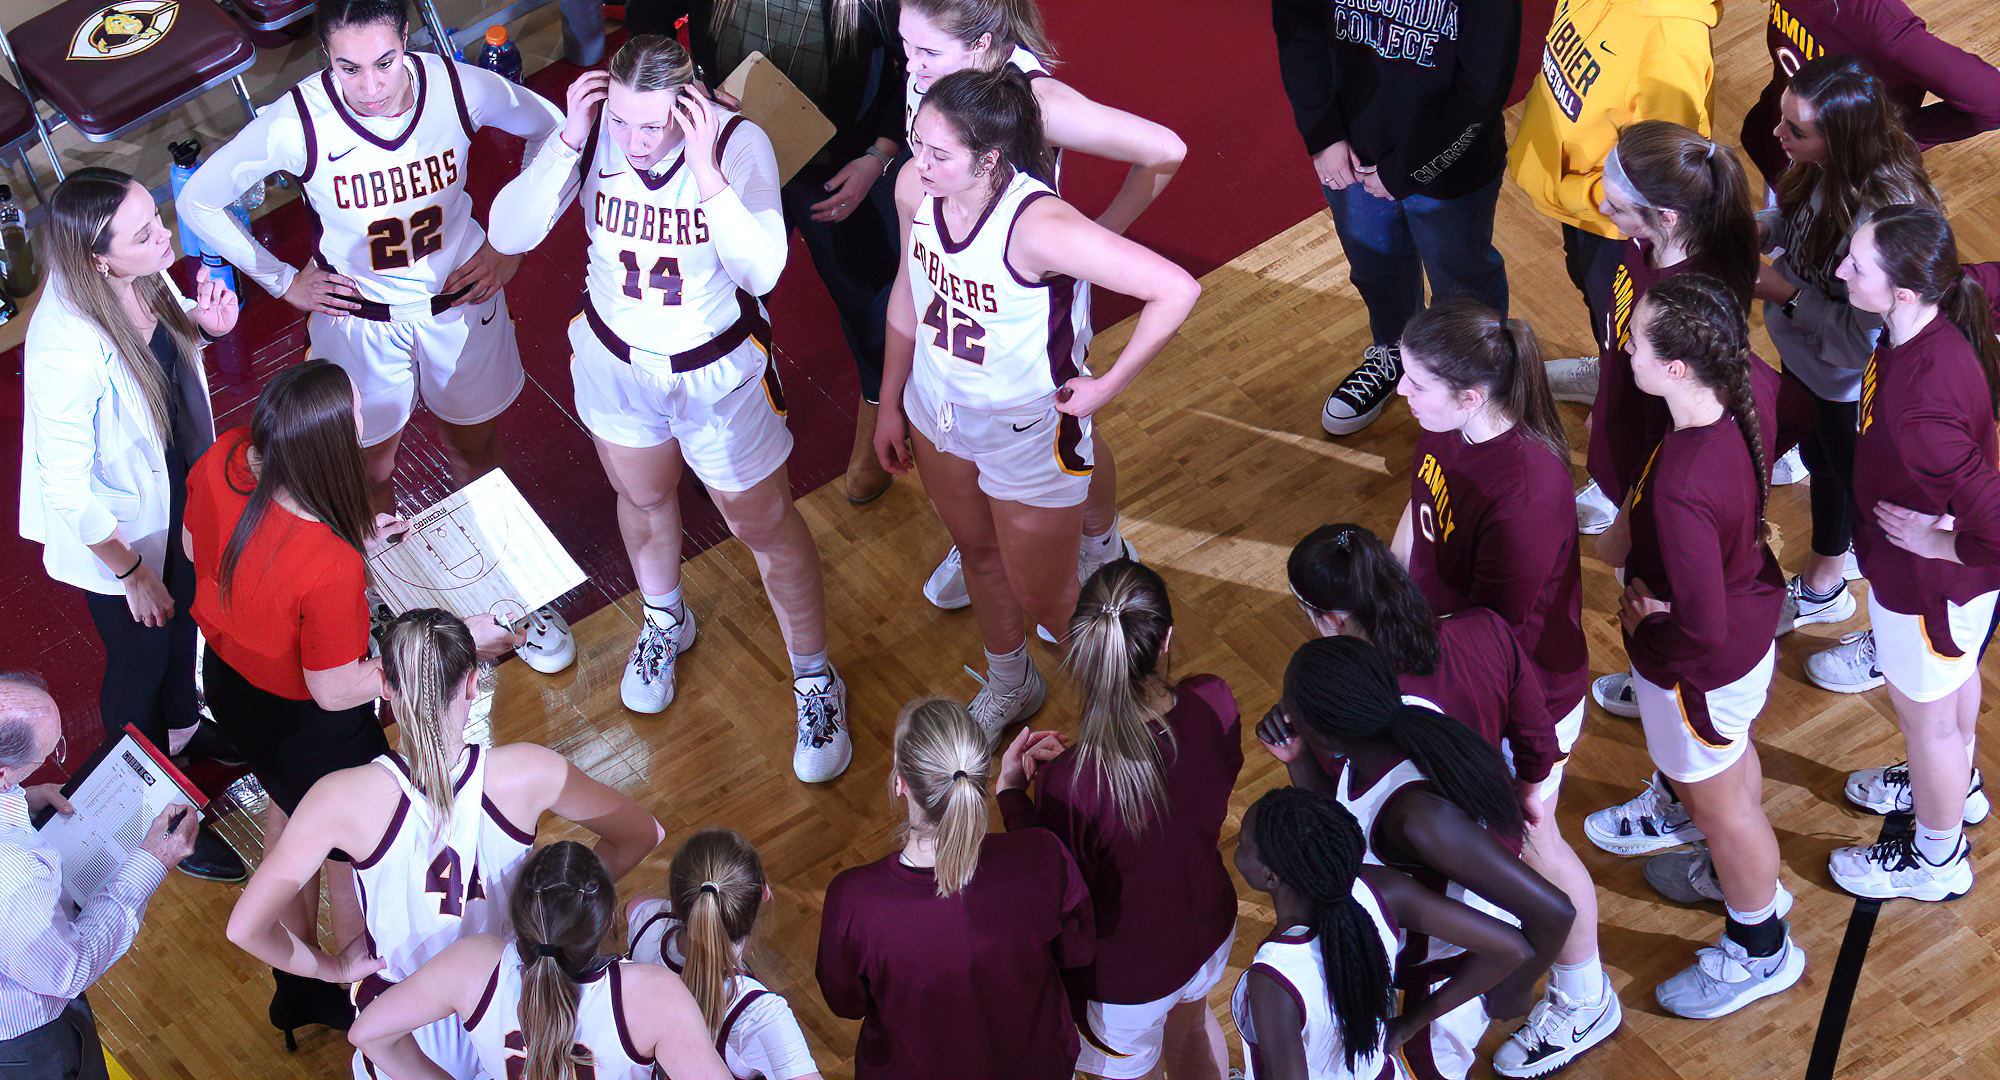 Concordia couldn't make up the 15-3 difference in made 3-point field goals against St. Mary's and fell 71-54 in Winona.